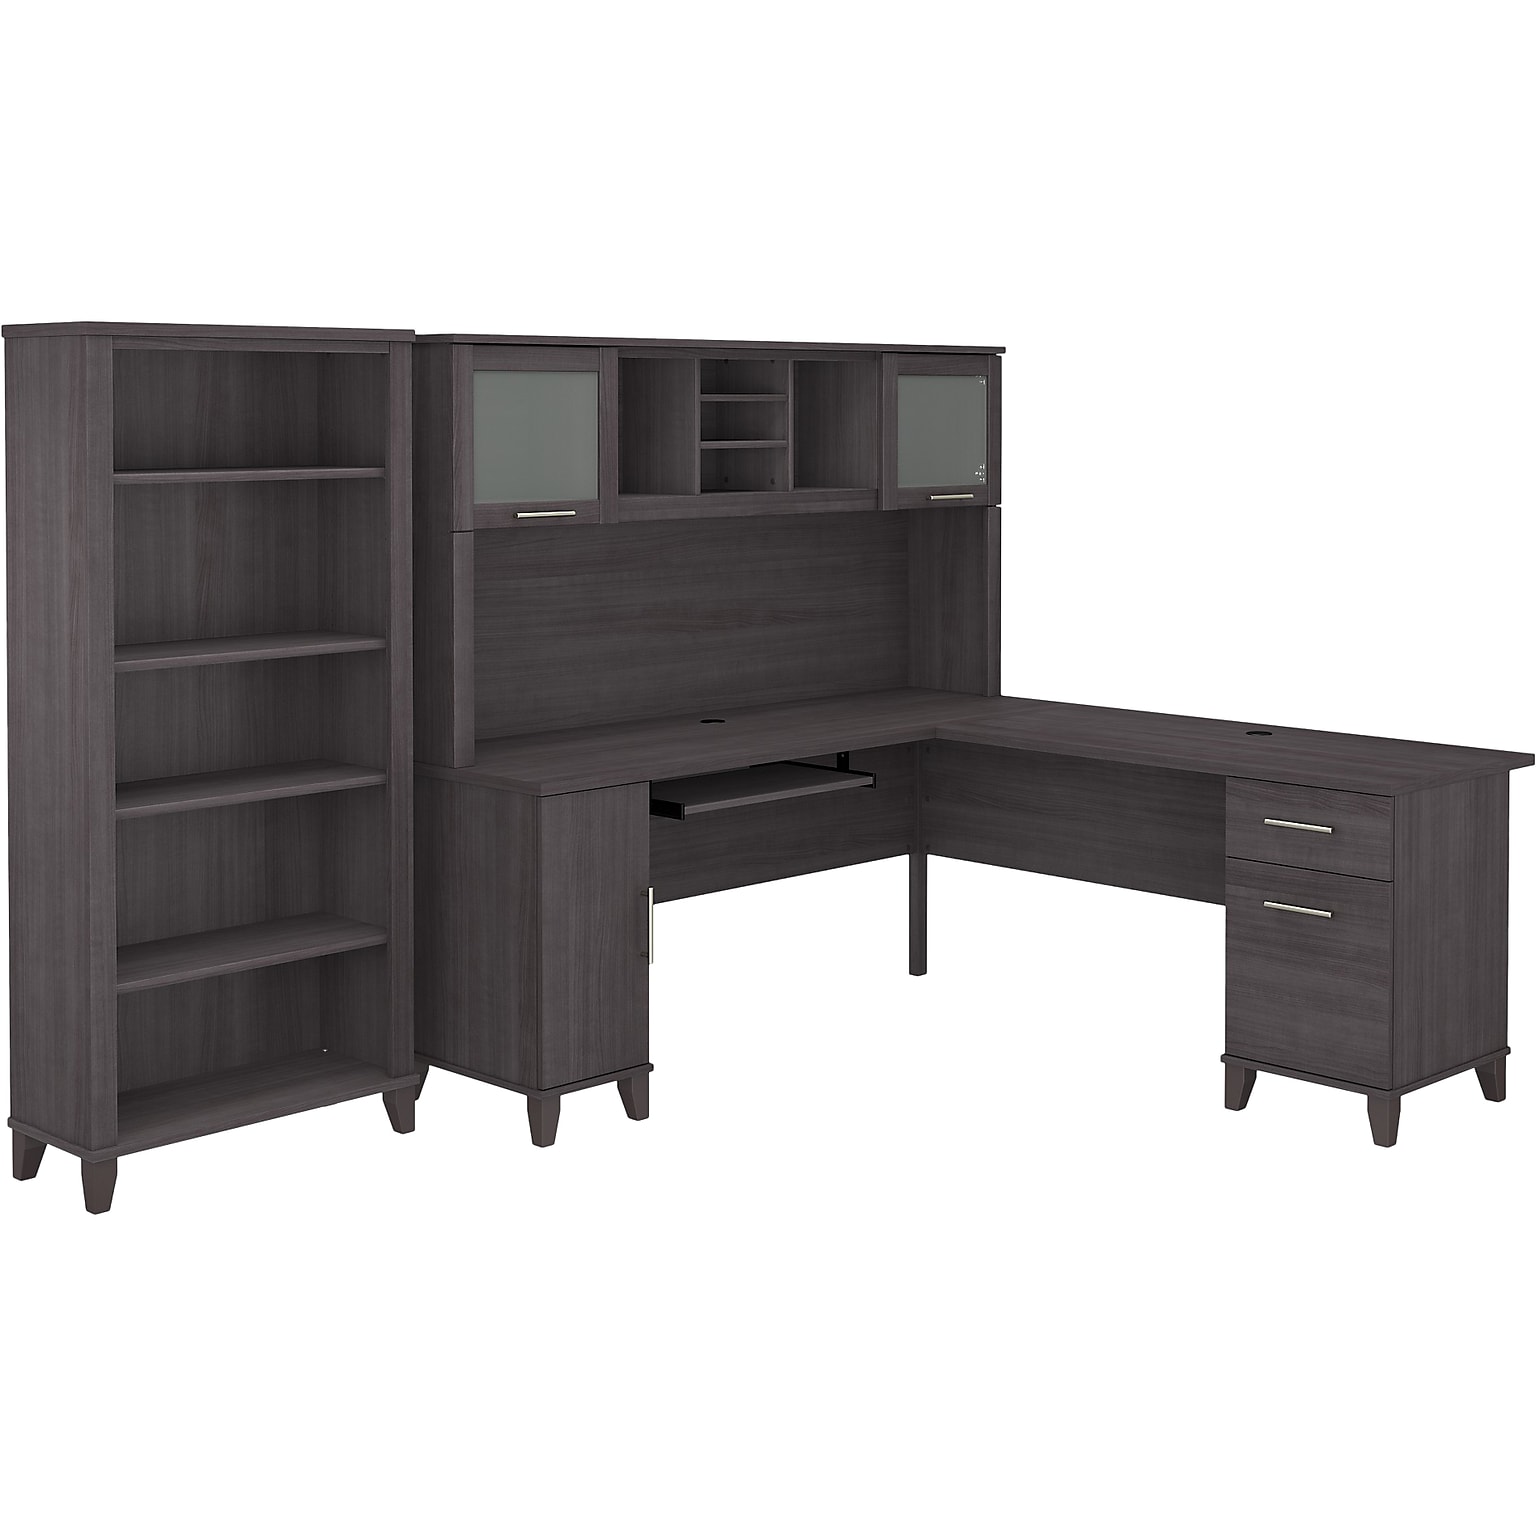 Bush Furniture Somerset 72W L Shaped Desk with Hutch and 5 Shelf Bookcase, Storm Gray (SET011SG)